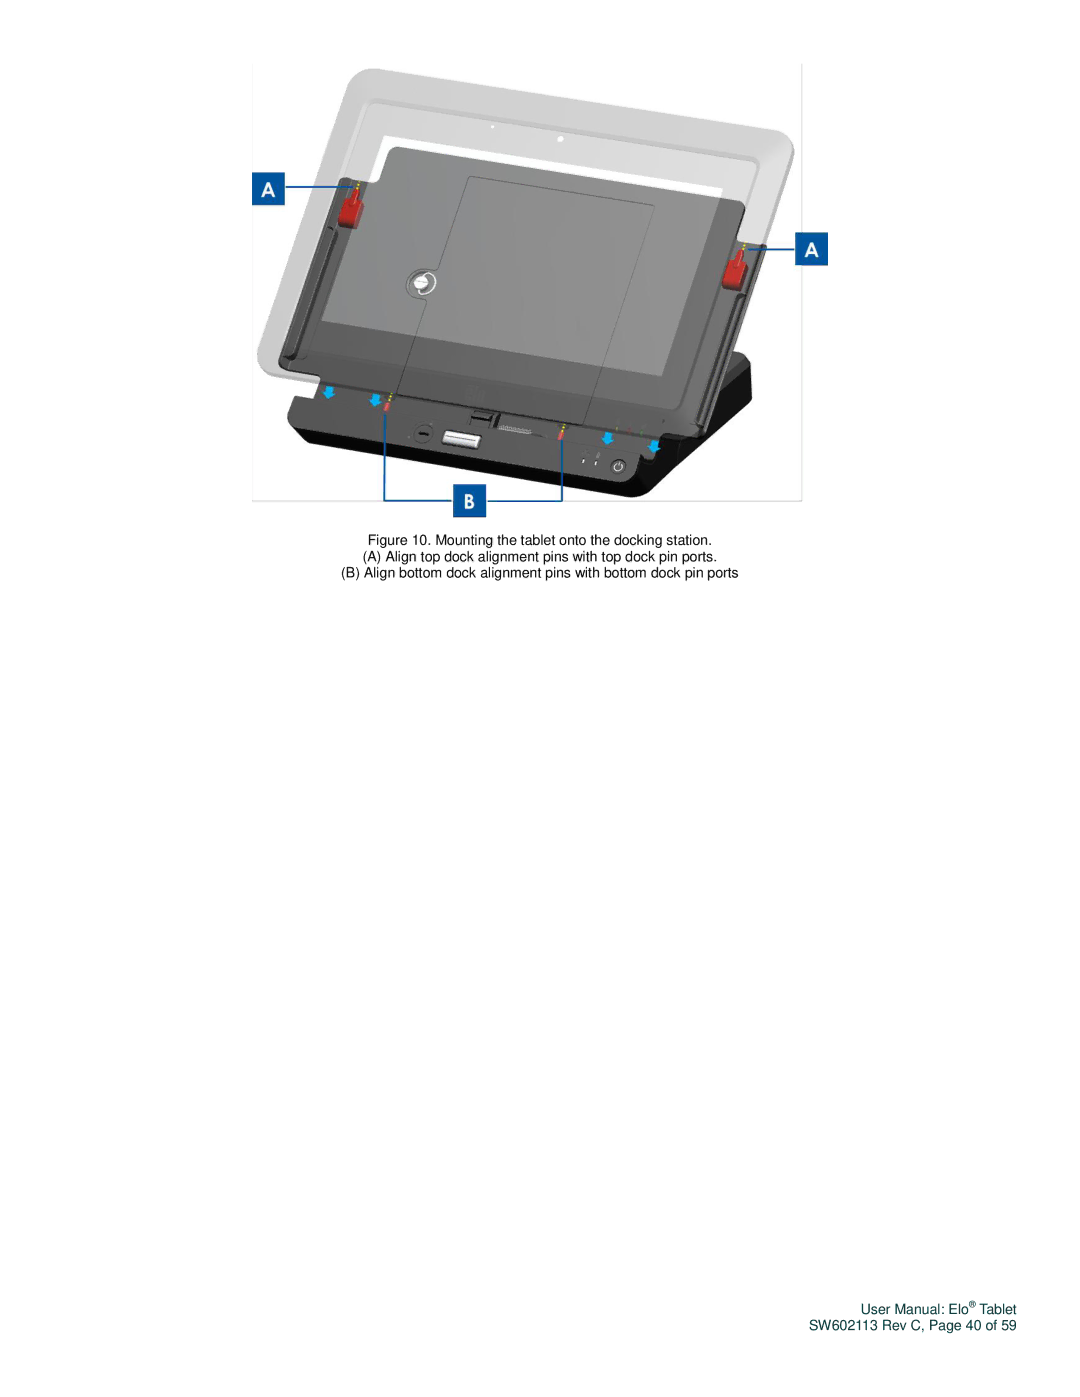 Elo TouchSystems manual SW602113 Rev C, Page 40 